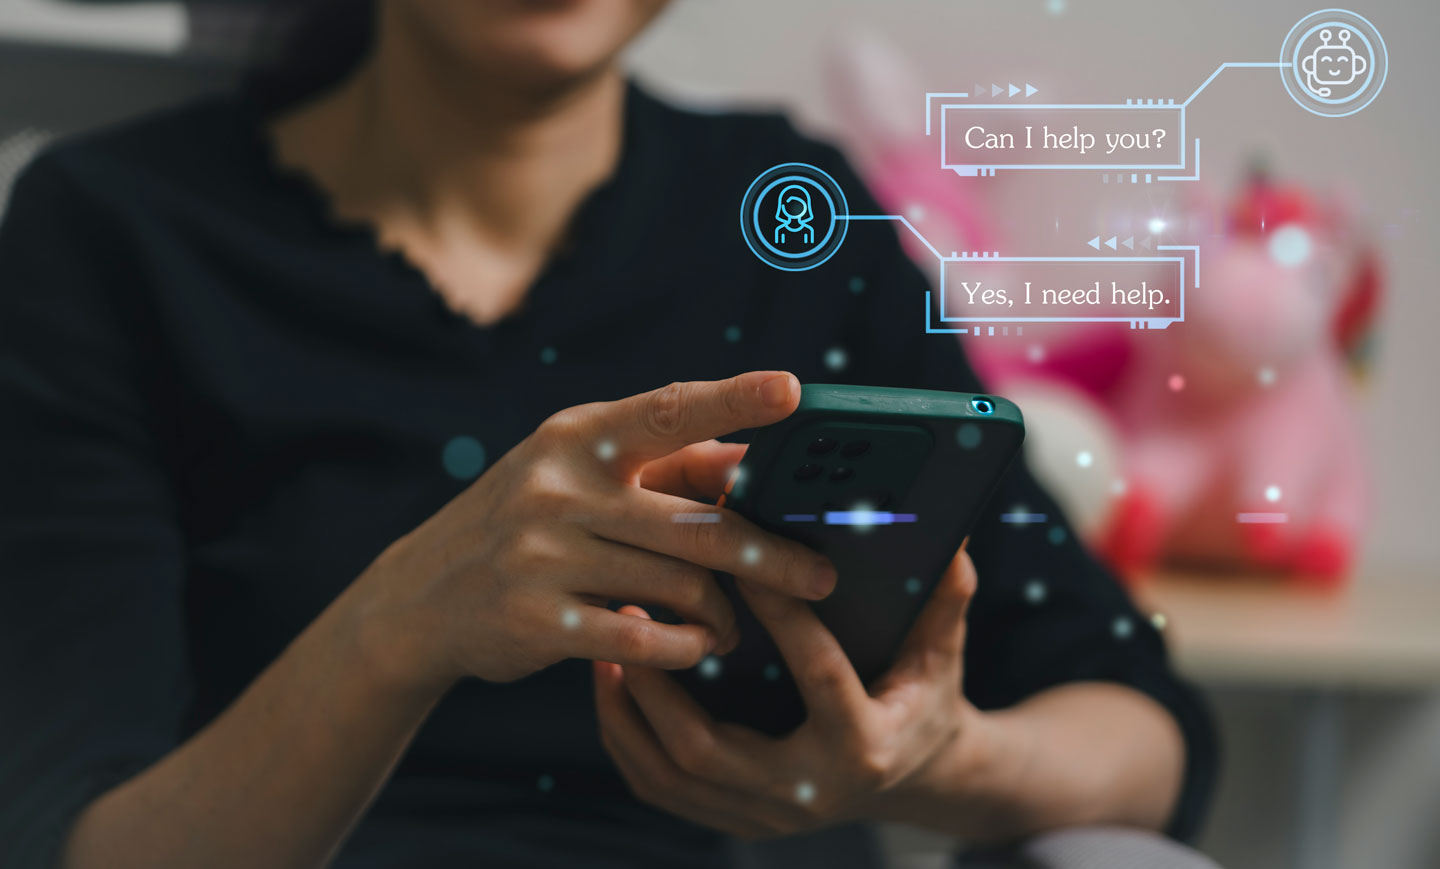 a person holds their smartphone in their hands, and above the phone a graphic shows the conversation they're having with a chatbot; the chatbot says 